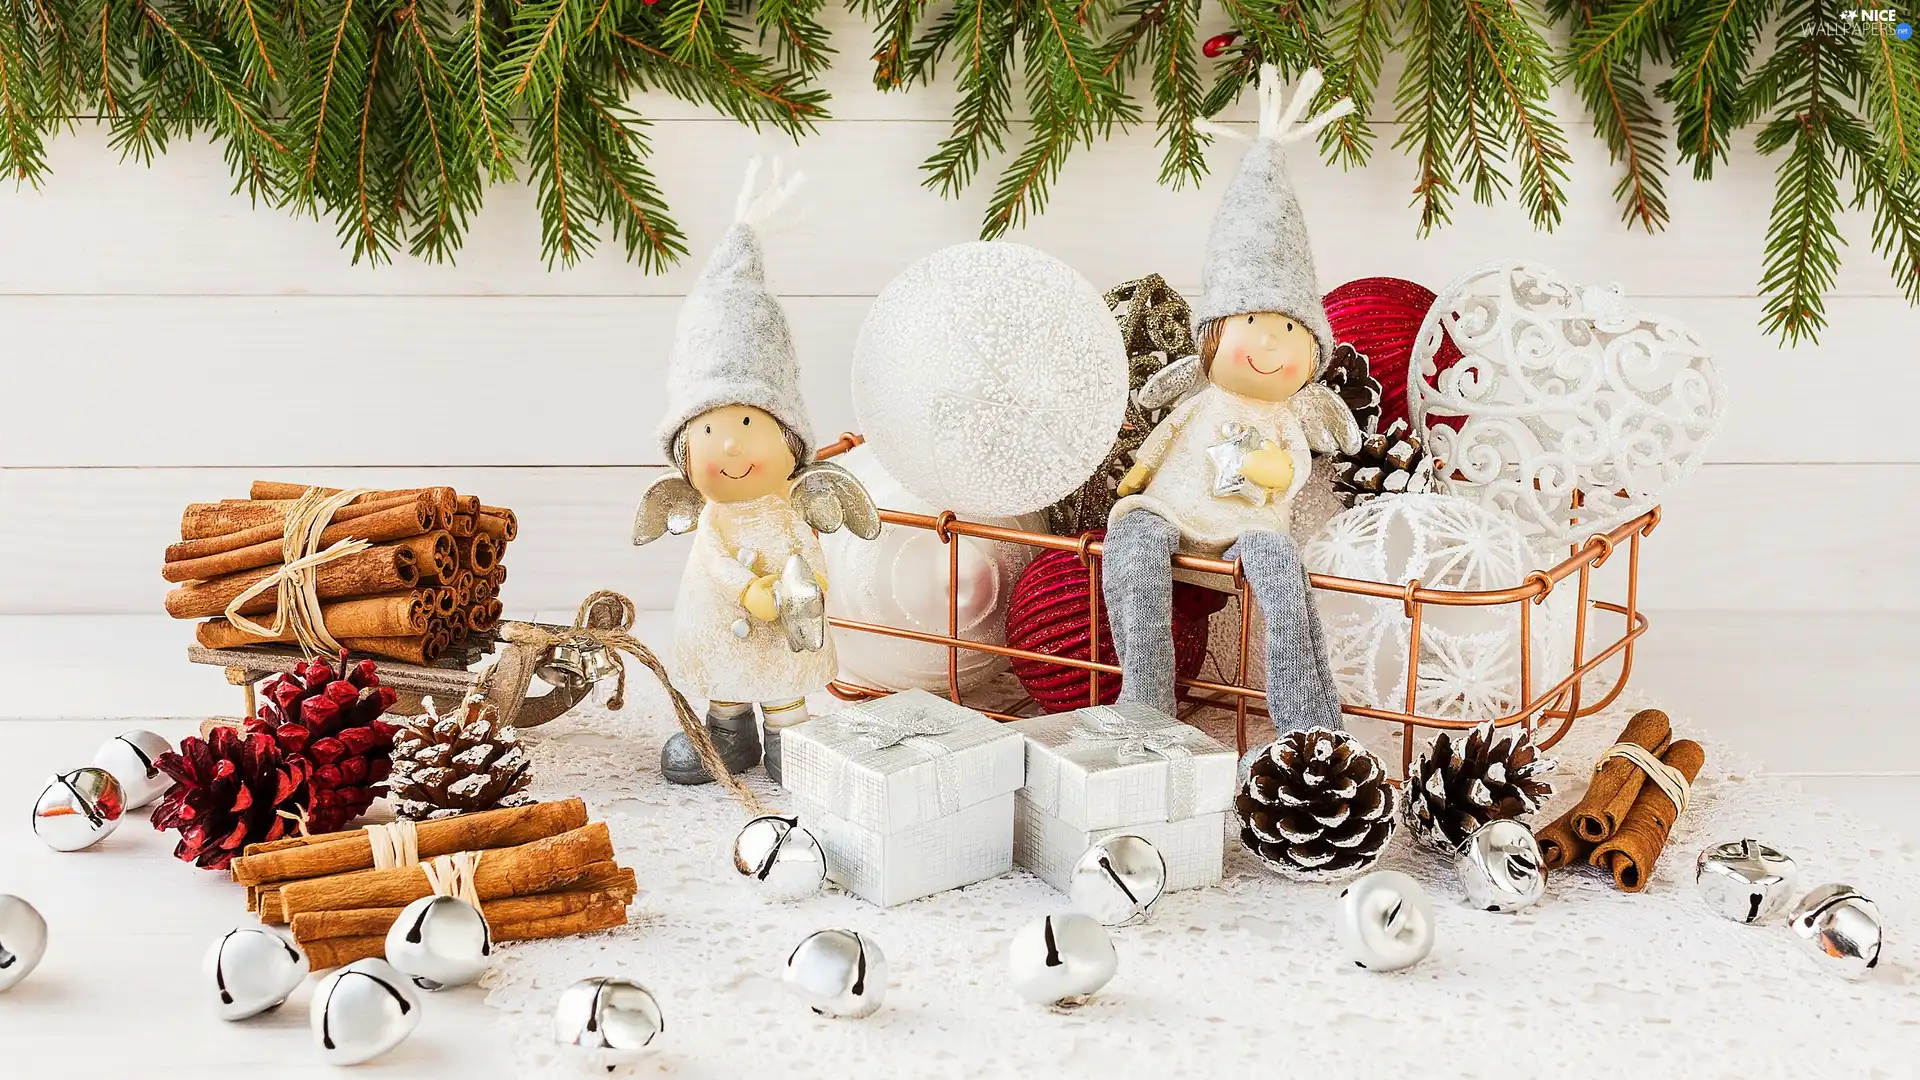 cones, cinnamon, composition, sledge, angels, Christmas, basket, Twigs, boarding, baubles, Two cars, gifts